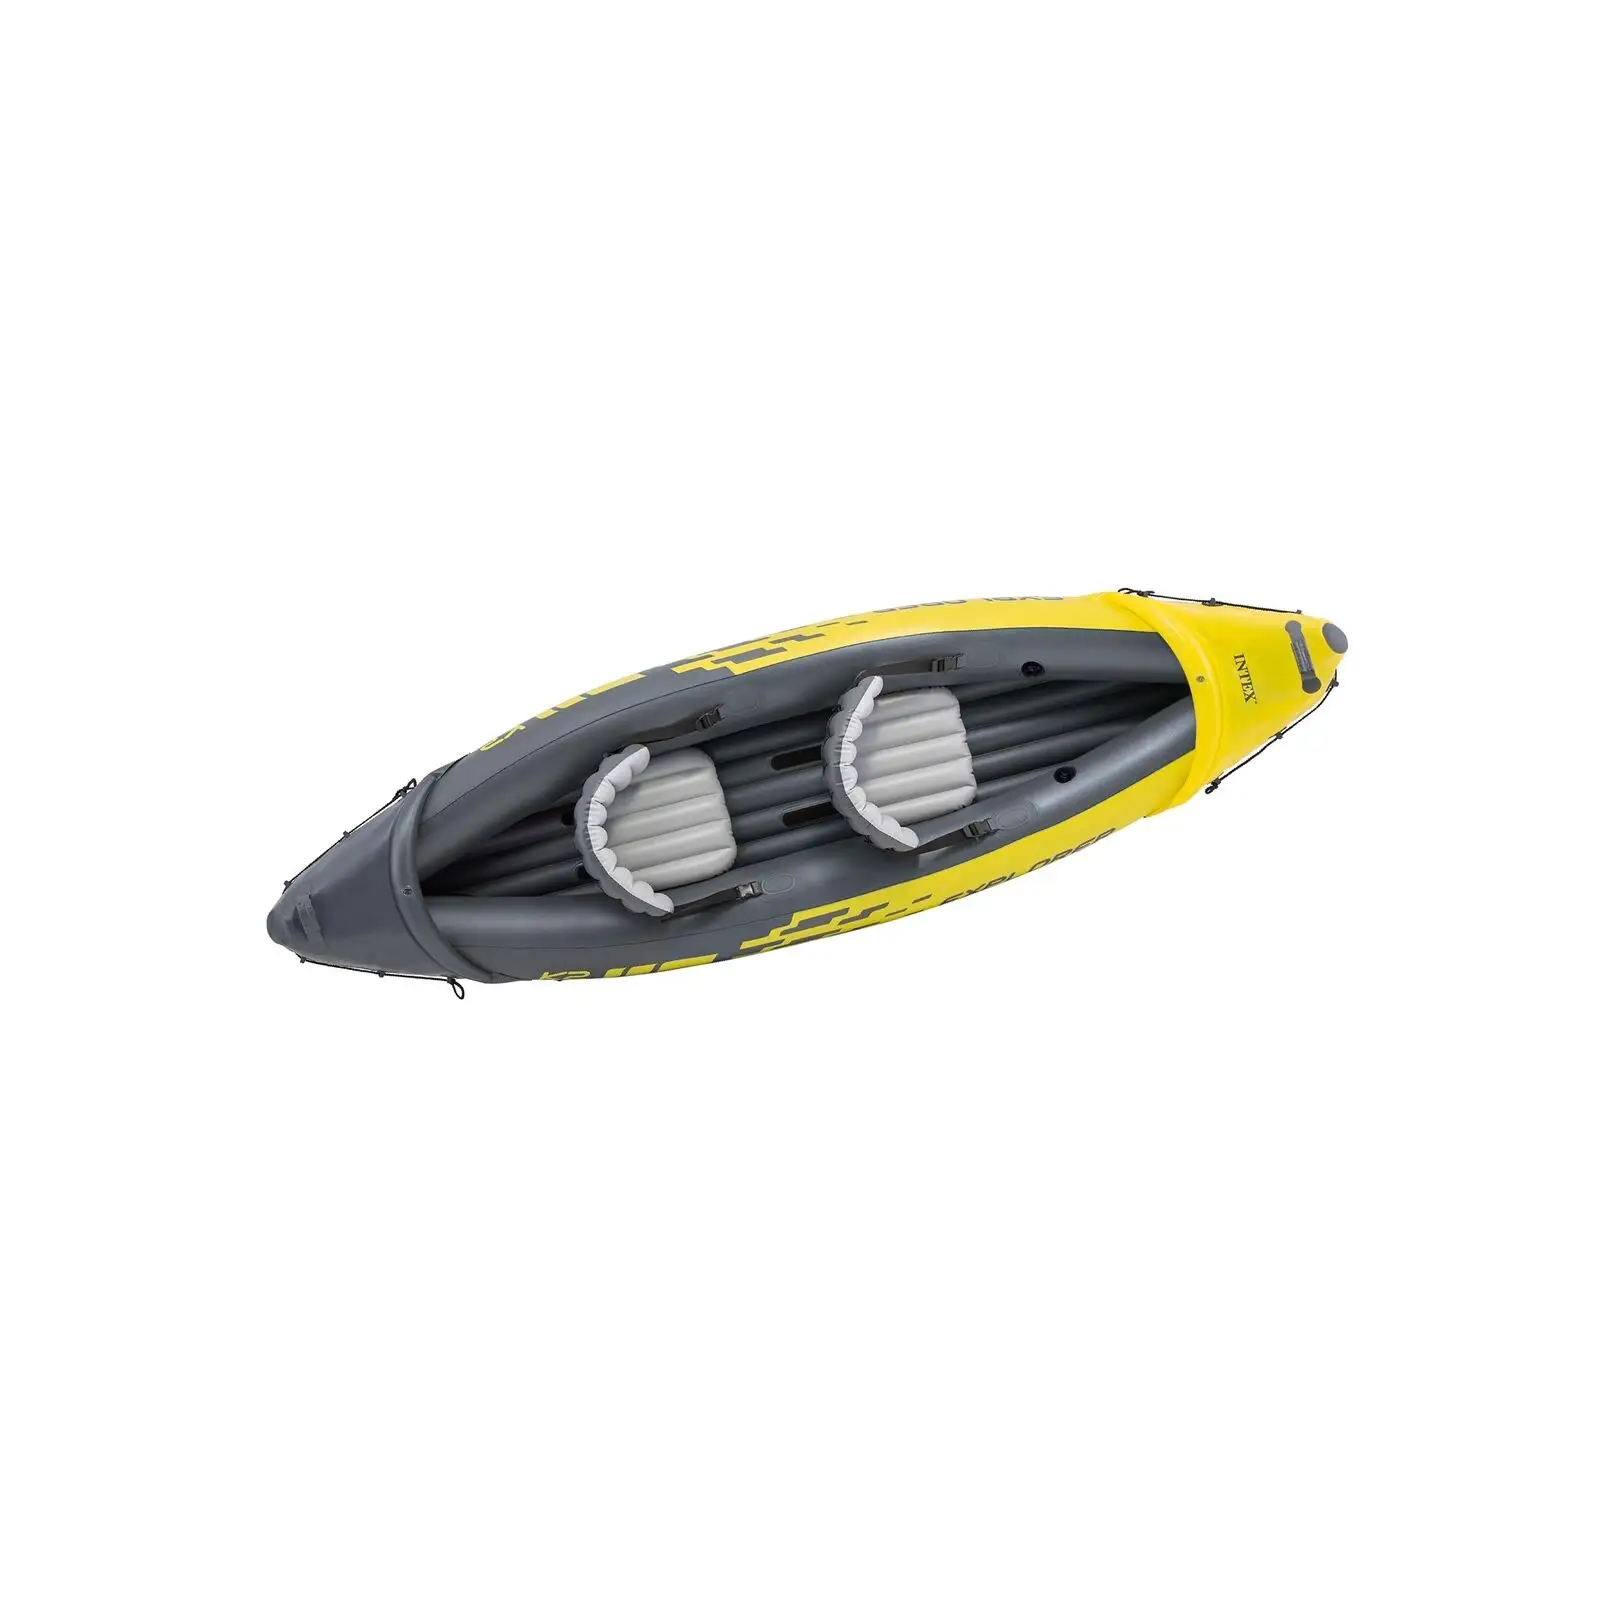 INTEX 68307 K2 KAYAK Inflatable Rowing Boat set Outdoor professional rowing boat Bring paddle For Sport Gaming